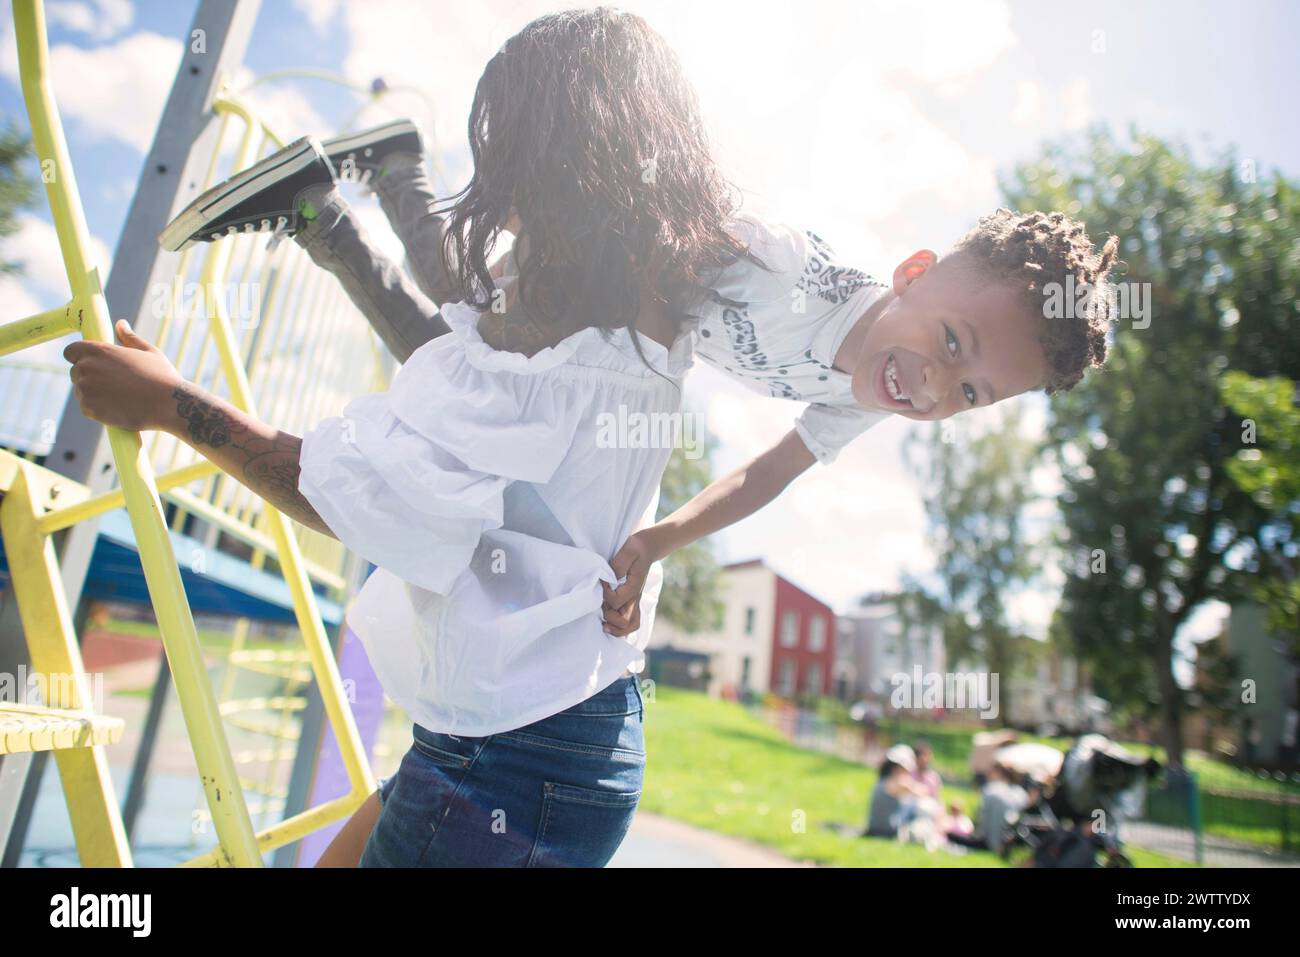 Child playing on a carousel in a park Stock Photo